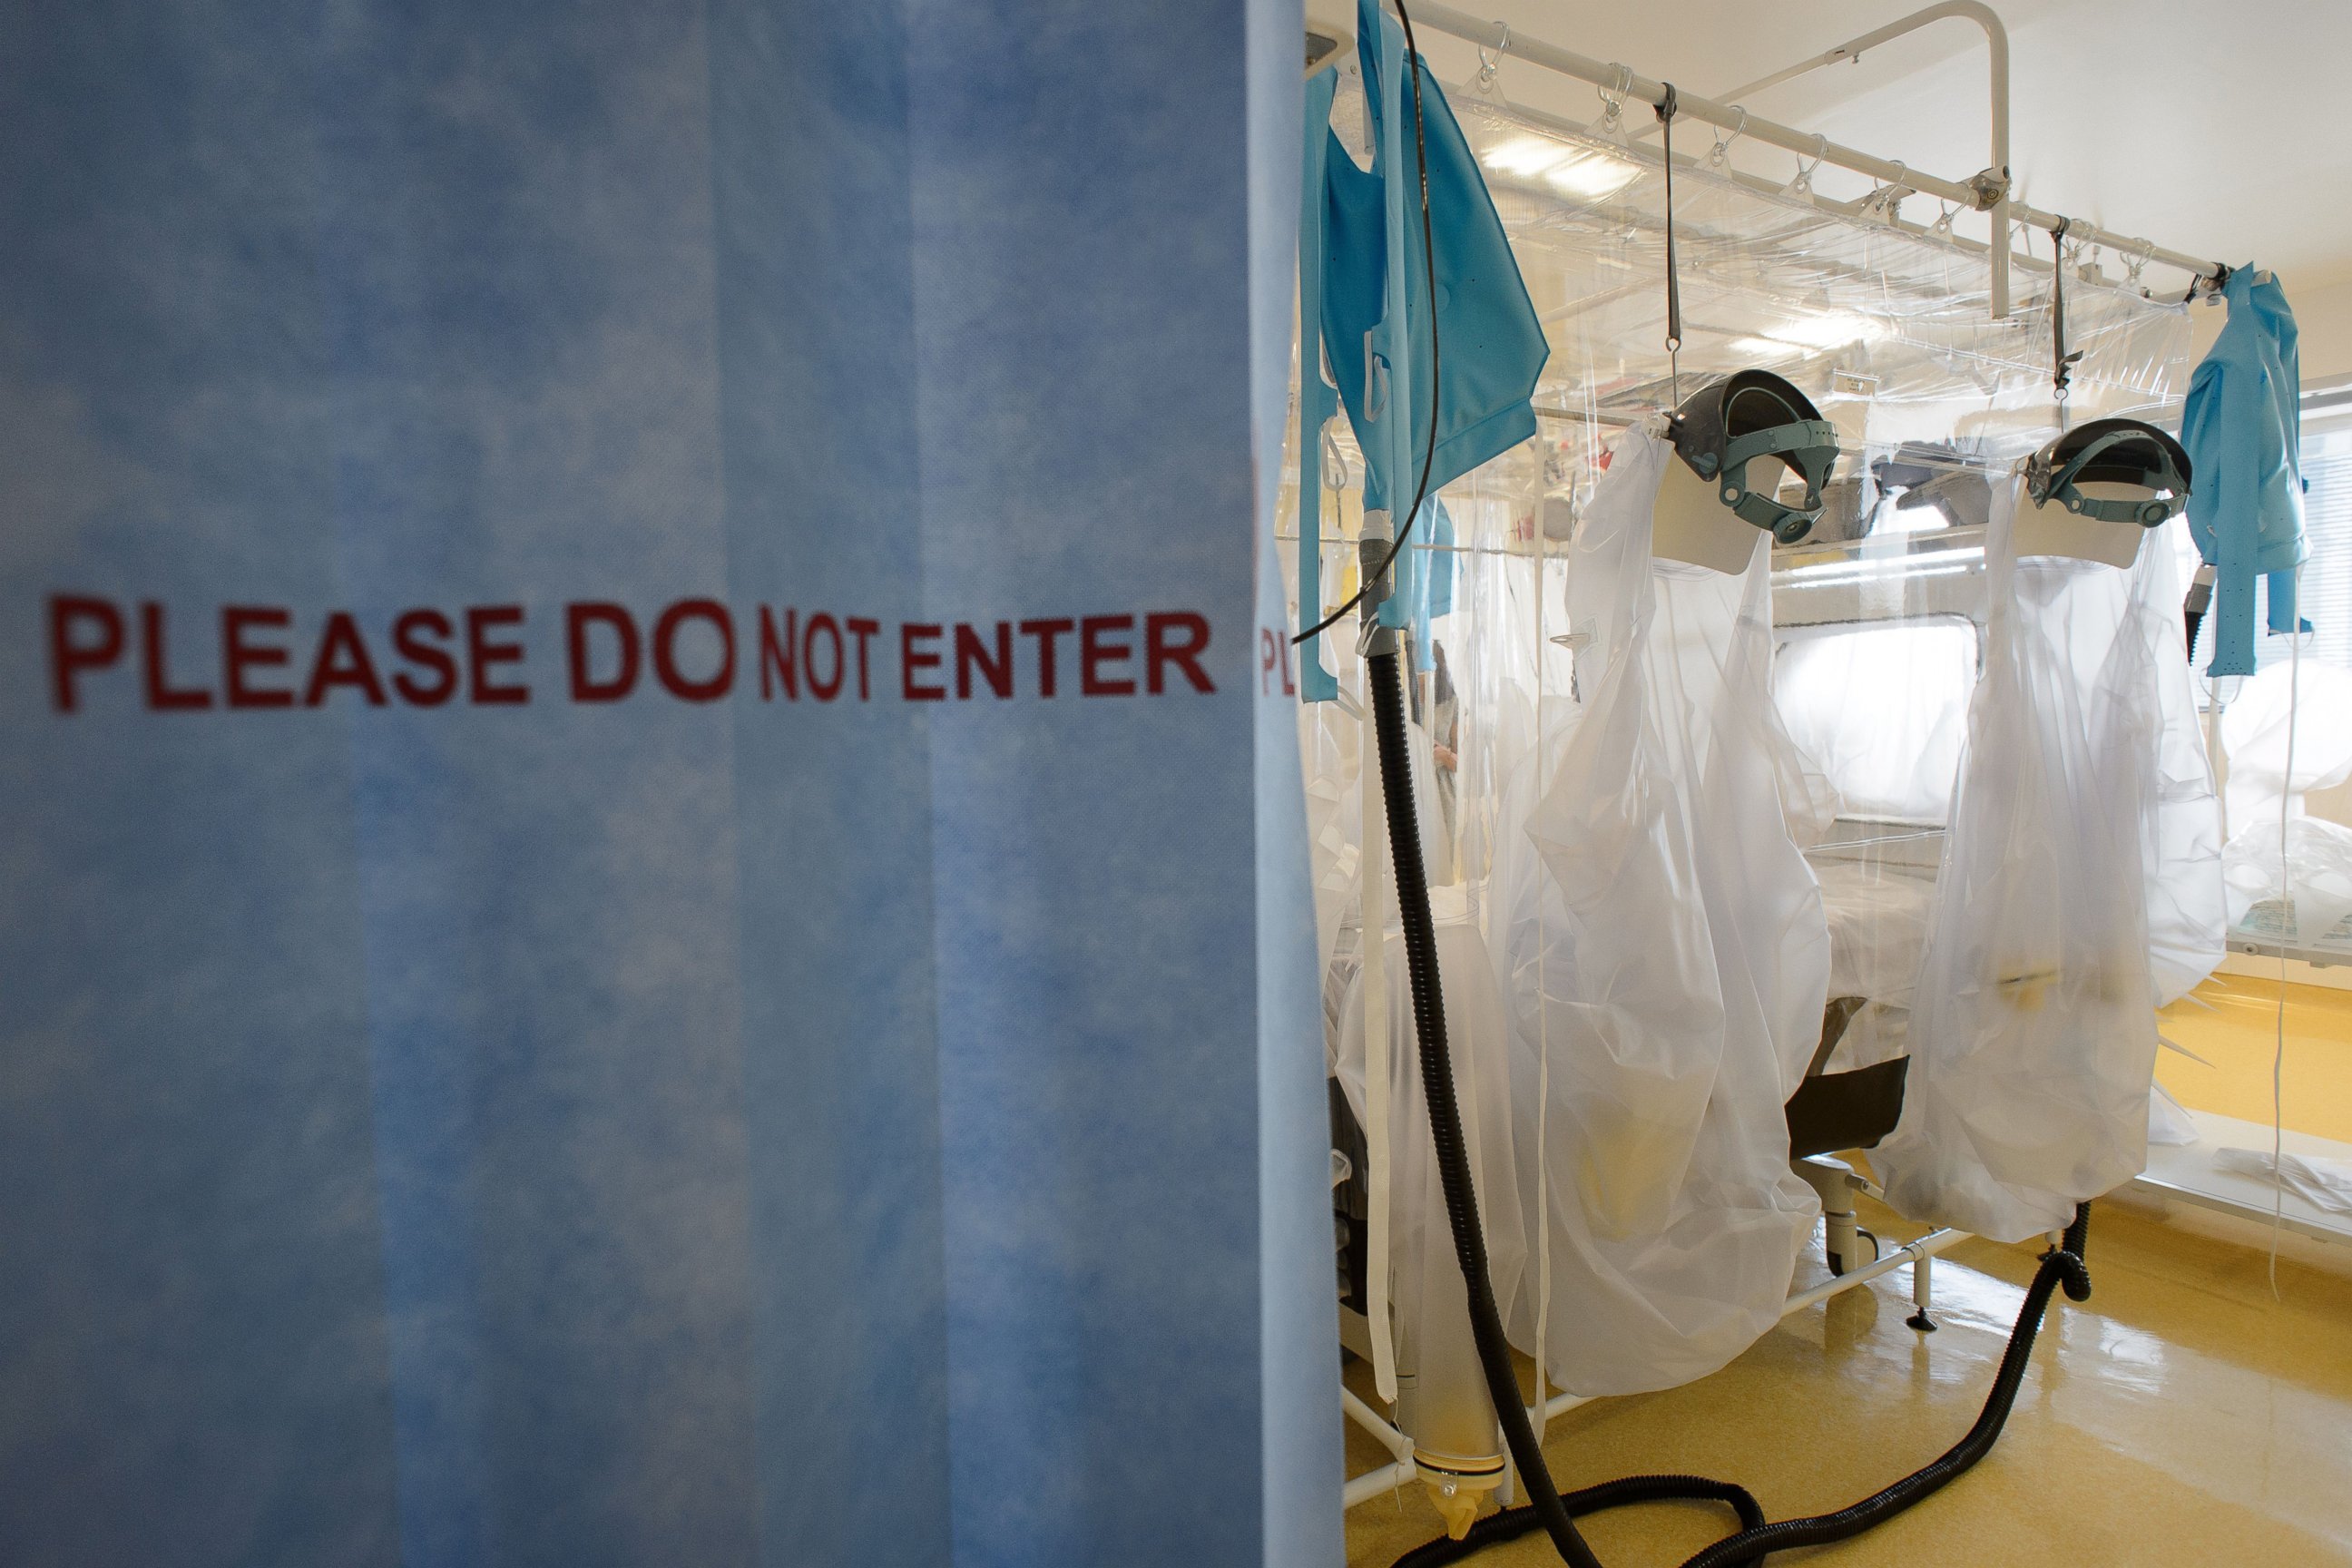 PHOTO: Protective clothing and facilities are in place at the Royal Free Hospital in north London, Aug. 6, 2014, in preparation for a patient testing positive for the Ebola virus.